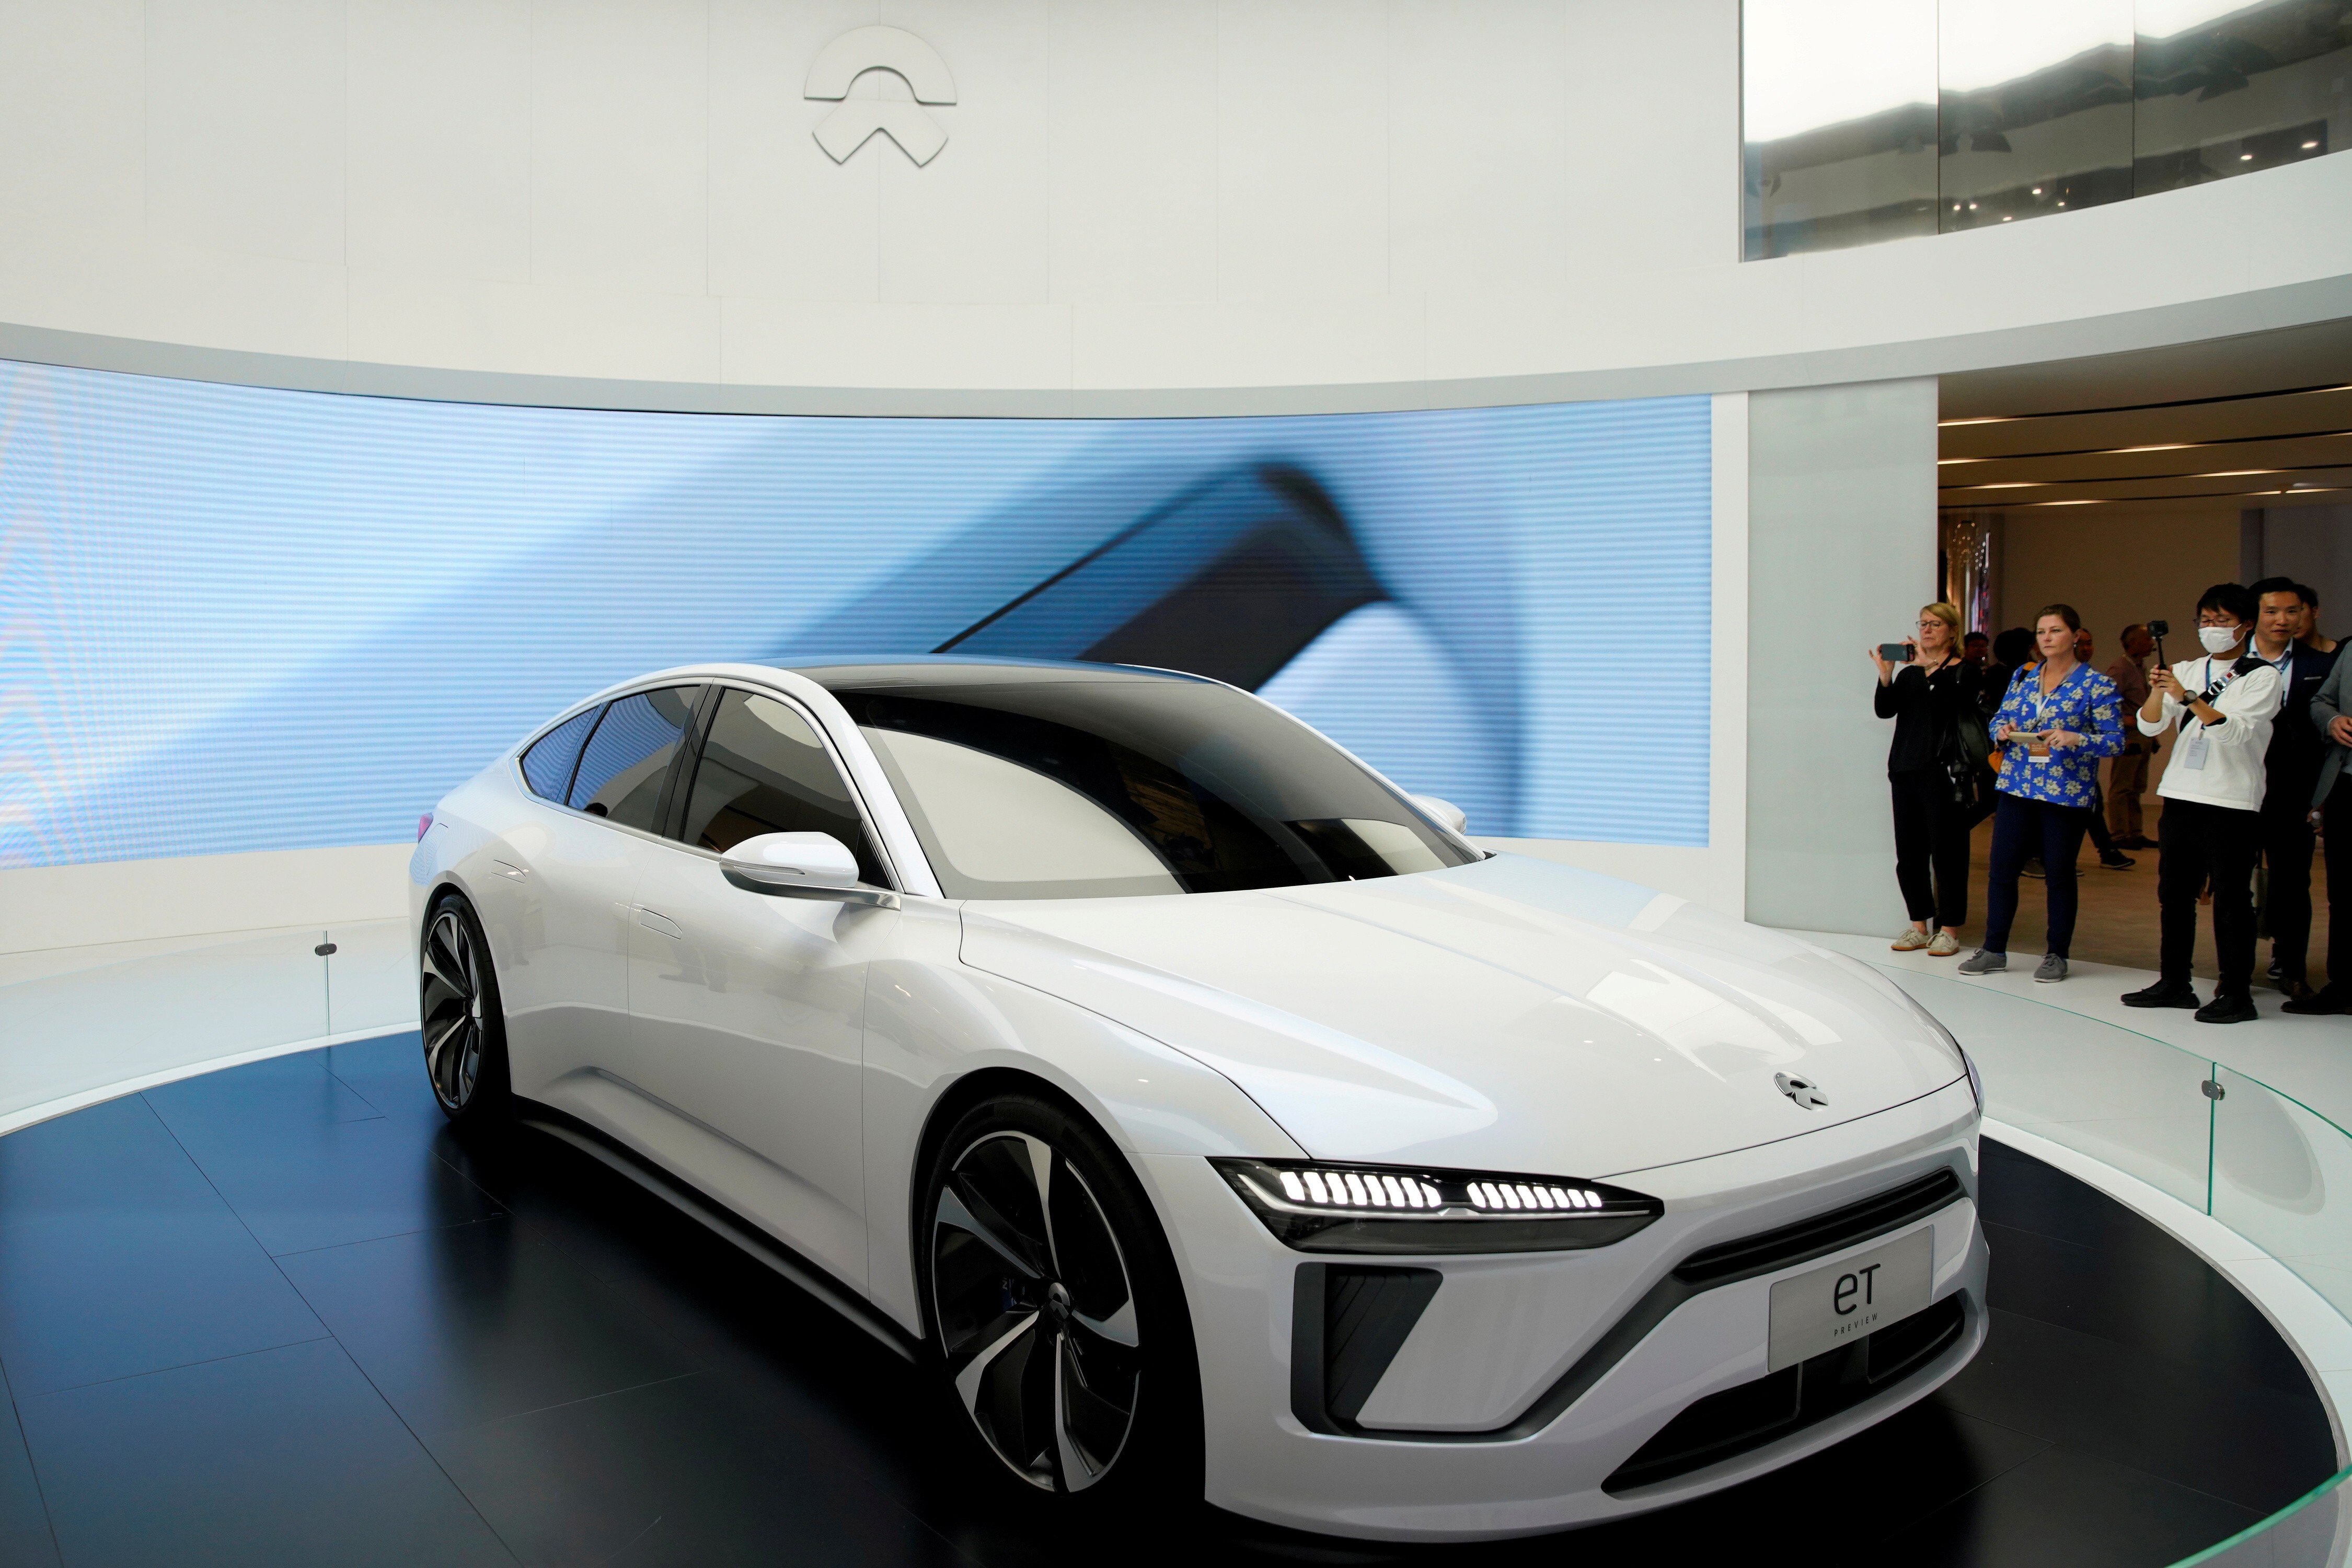 NIO's new electric vehicle ET7 is unveiled during the media day for Shanghai auto show in Shanghai in April 2019. Photo: Reuters